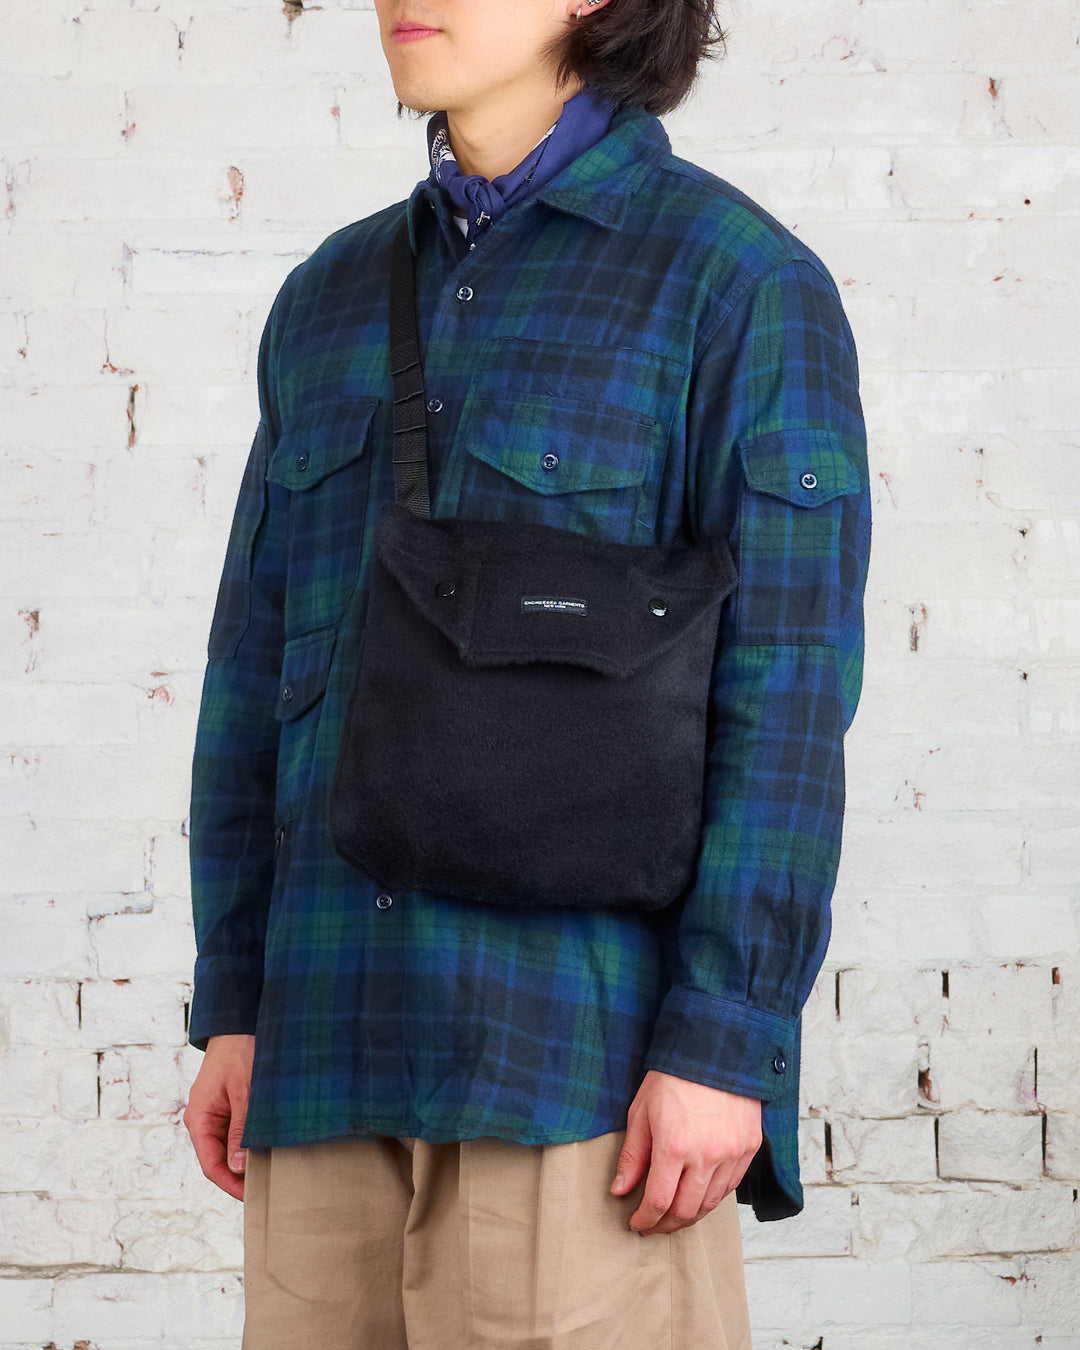 Engineered Garments Shoulder Pouch Black Poly Wool Shaggy